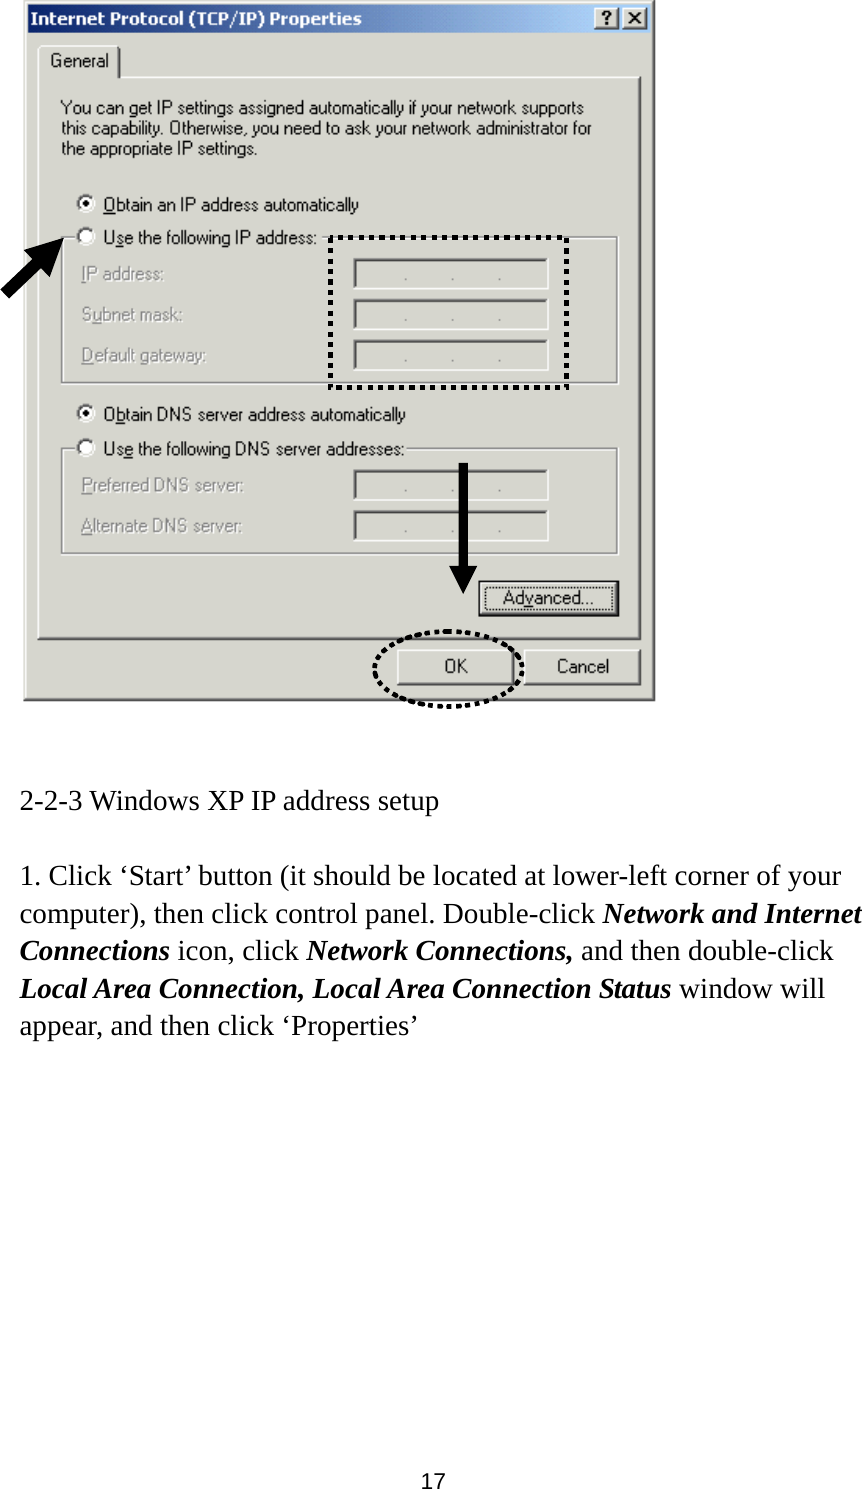 17    2-2-3 Windows XP IP address setup  1. Click ‘Start’ button (it should be located at lower-left corner of your computer), then click control panel. Double-click Network and Internet Connections icon, click Network Connections, and then double-click Local Area Connection, Local Area Connection Status window will appear, and then click ‘Properties’  